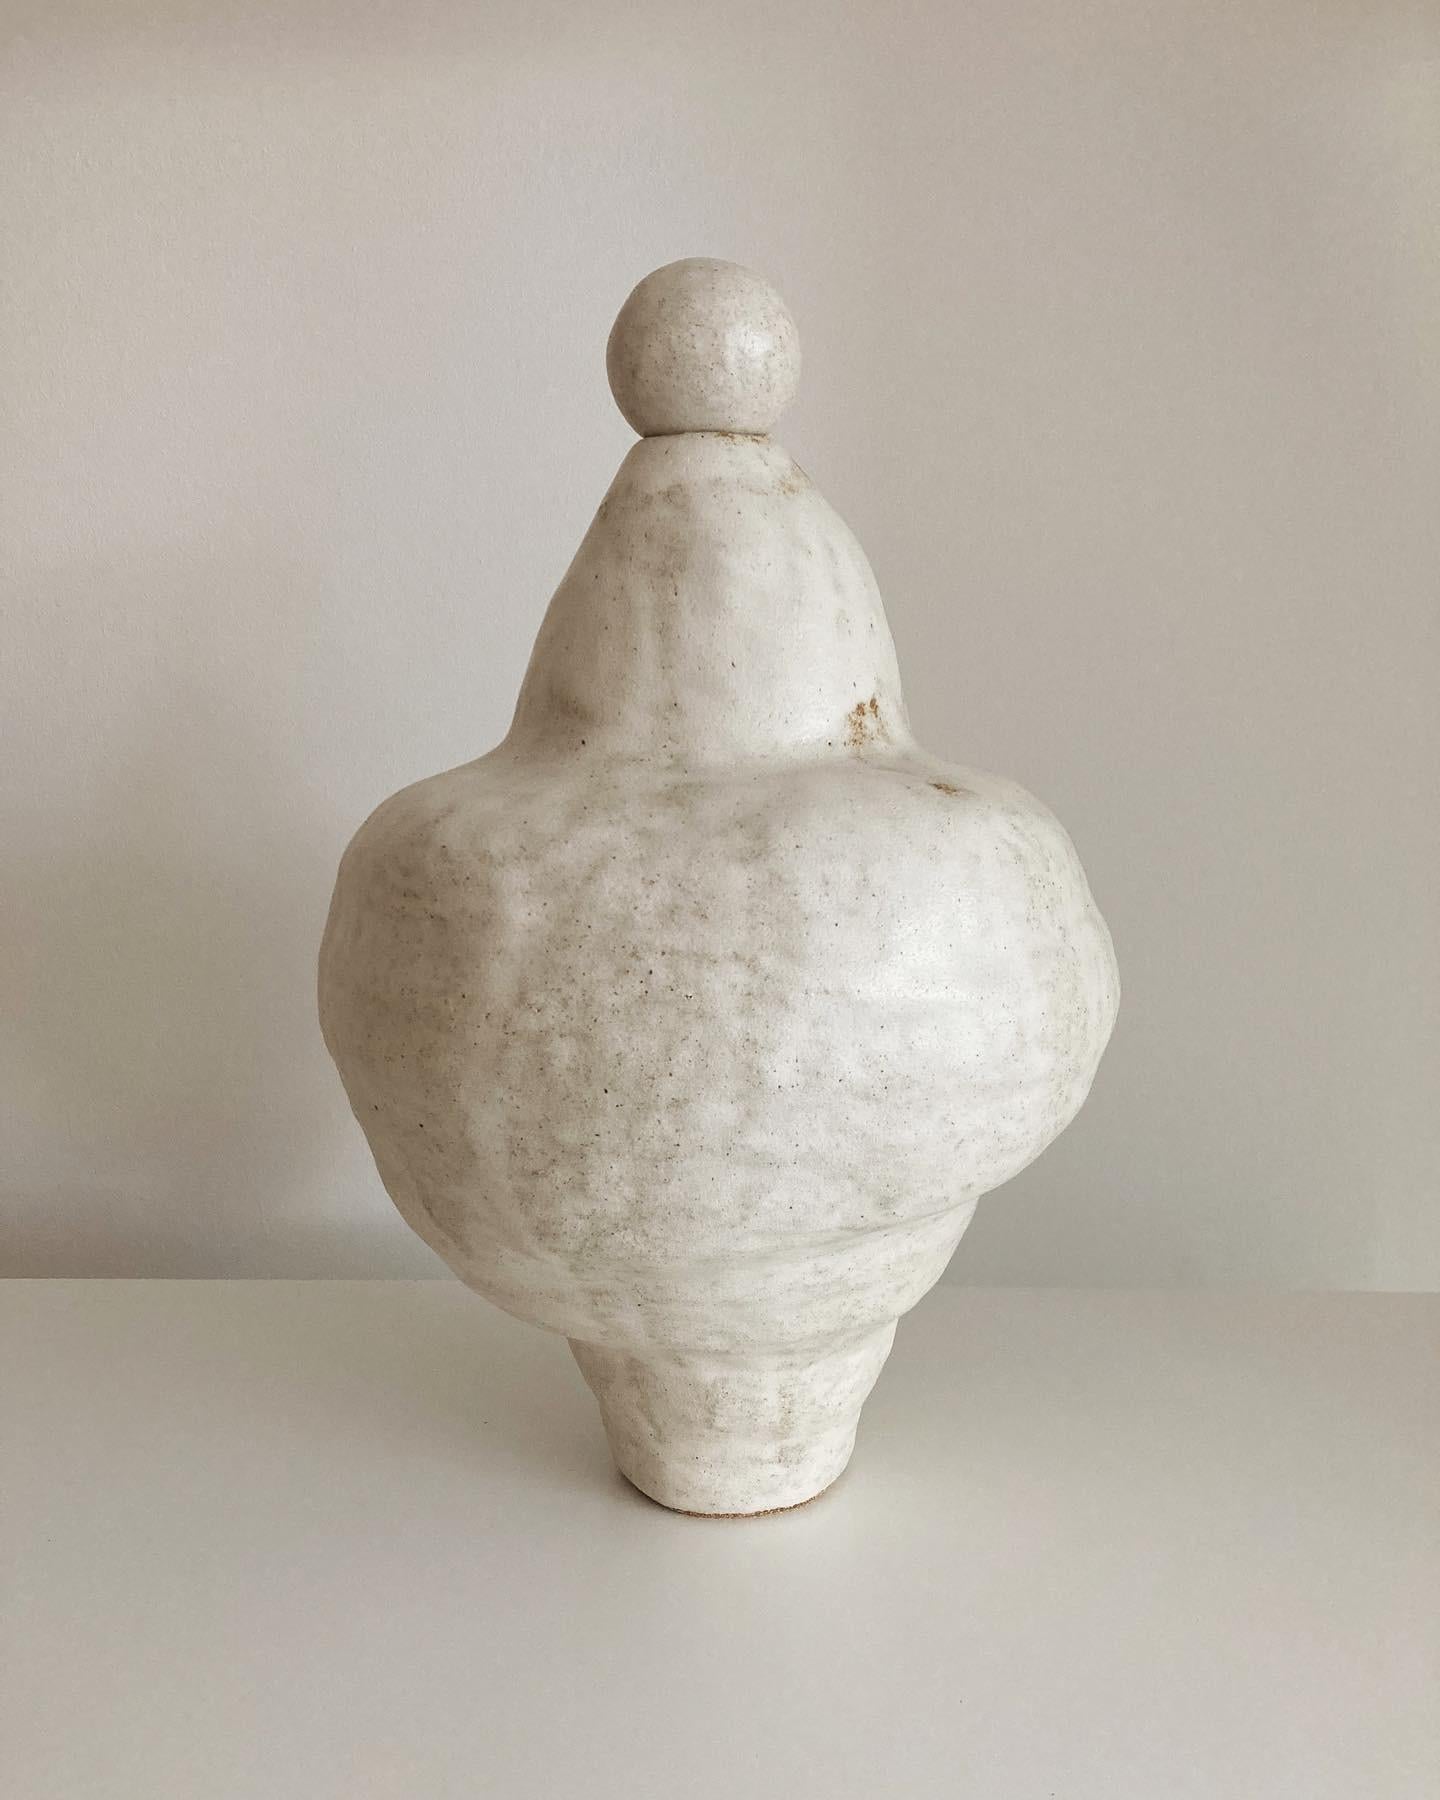 No.96 stoneware sculpture, Tonfisk by Ciona Lee 
One of a Kind
Dimensions: Ø 20 x H 28 cm
Materials: Grogged Stoneware, Satin Cream Glaze
Variations of size and colour available.

Tonfisk is the ceramic practice by Ciona Lee, a Korean-Italian artist